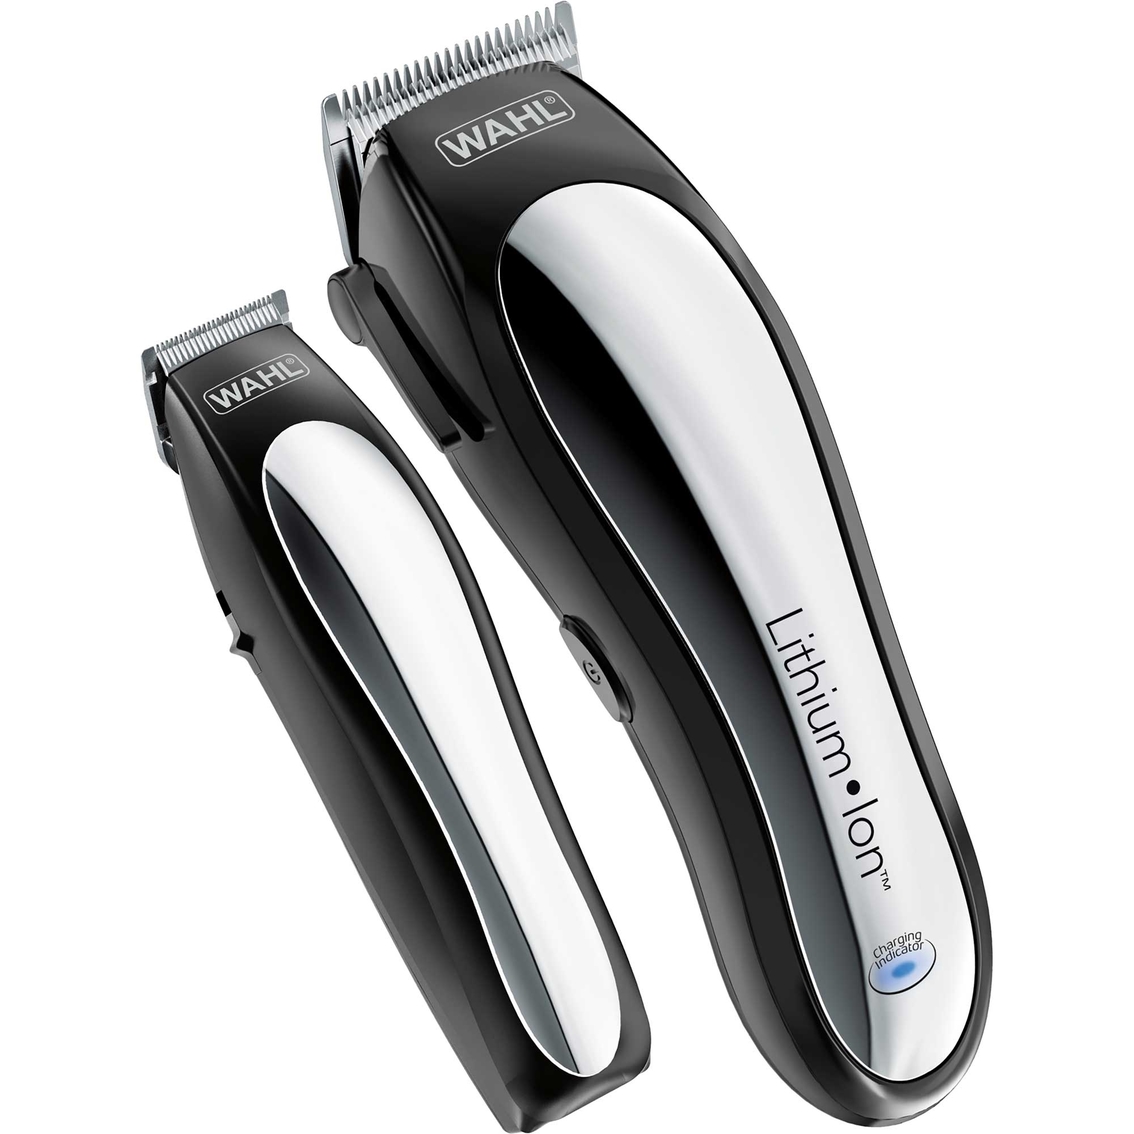 Wahl Lithium Pro Clipper - Image 2 of 3